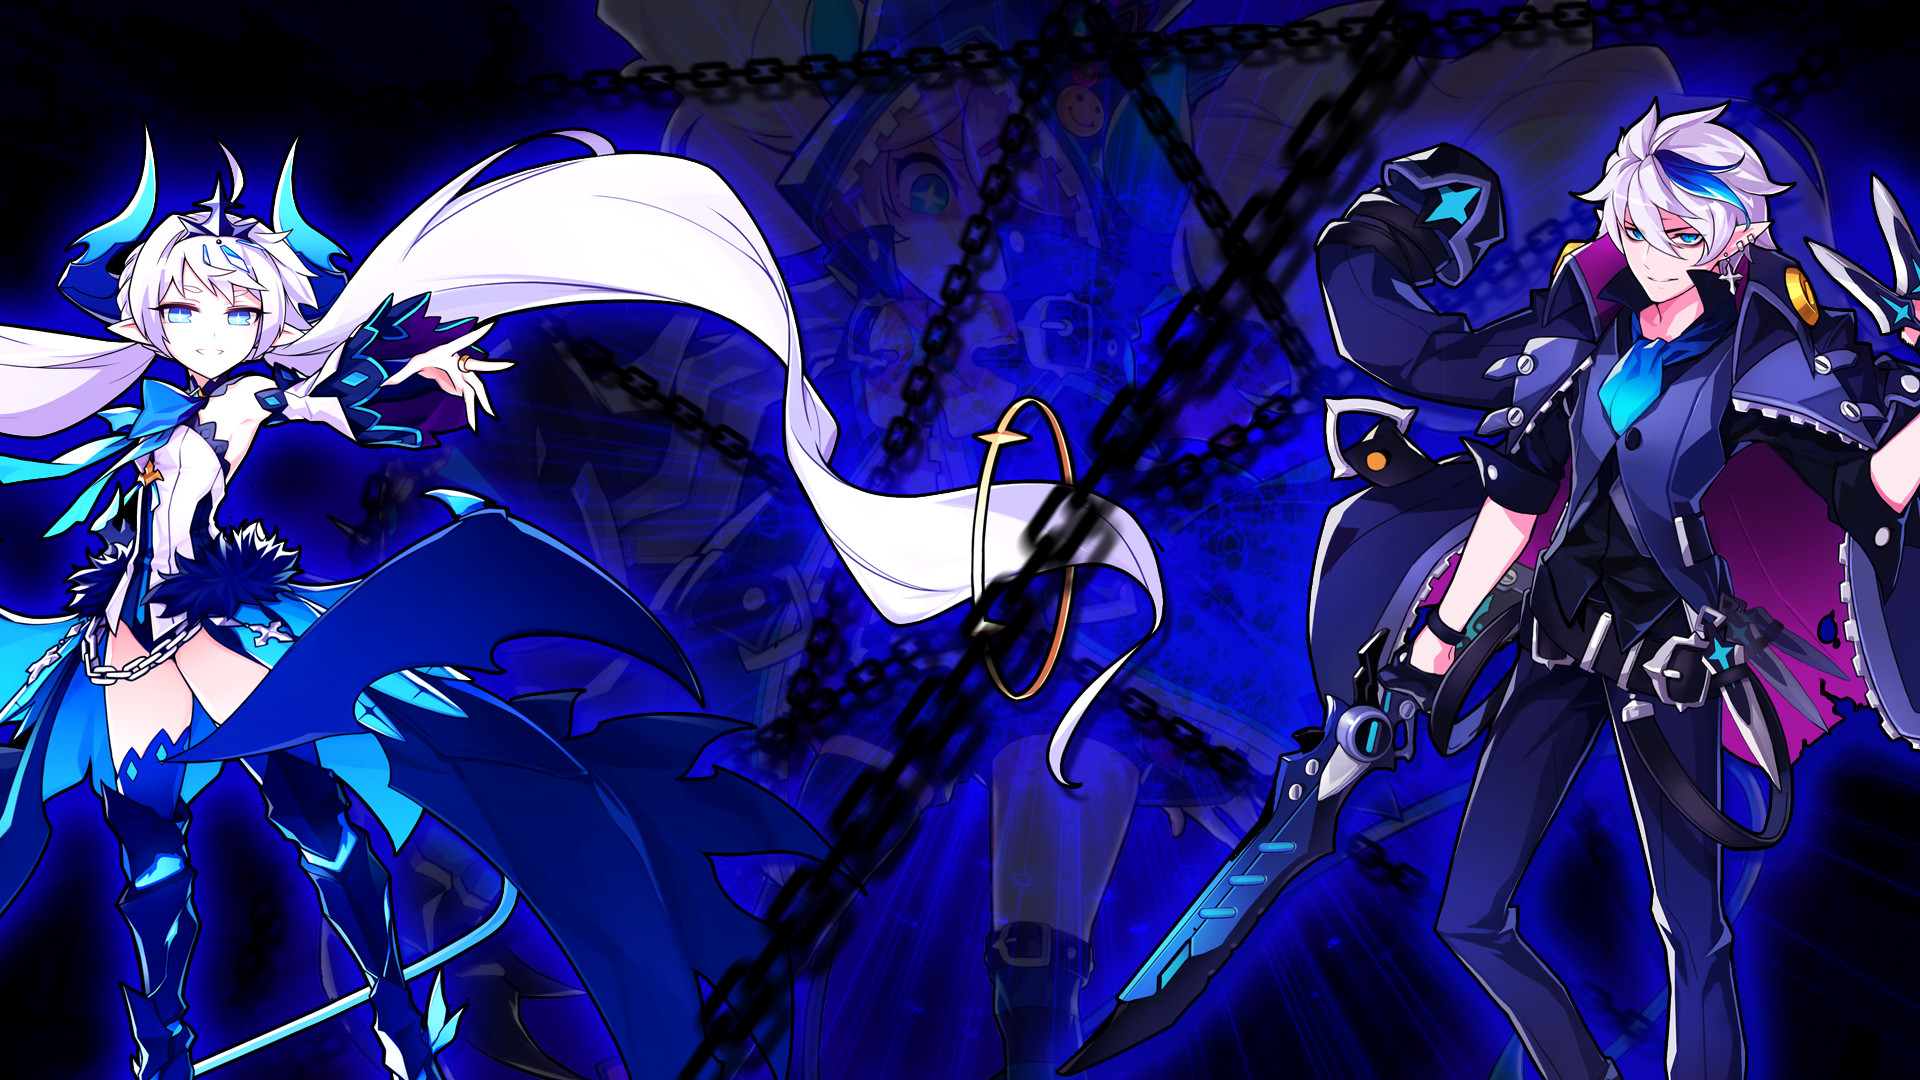 1920x1080 Lord Knight Elsword download Lord Knight Elsword image Source Â· Elsword  Noblesse Wallpaper WallpaperSafari